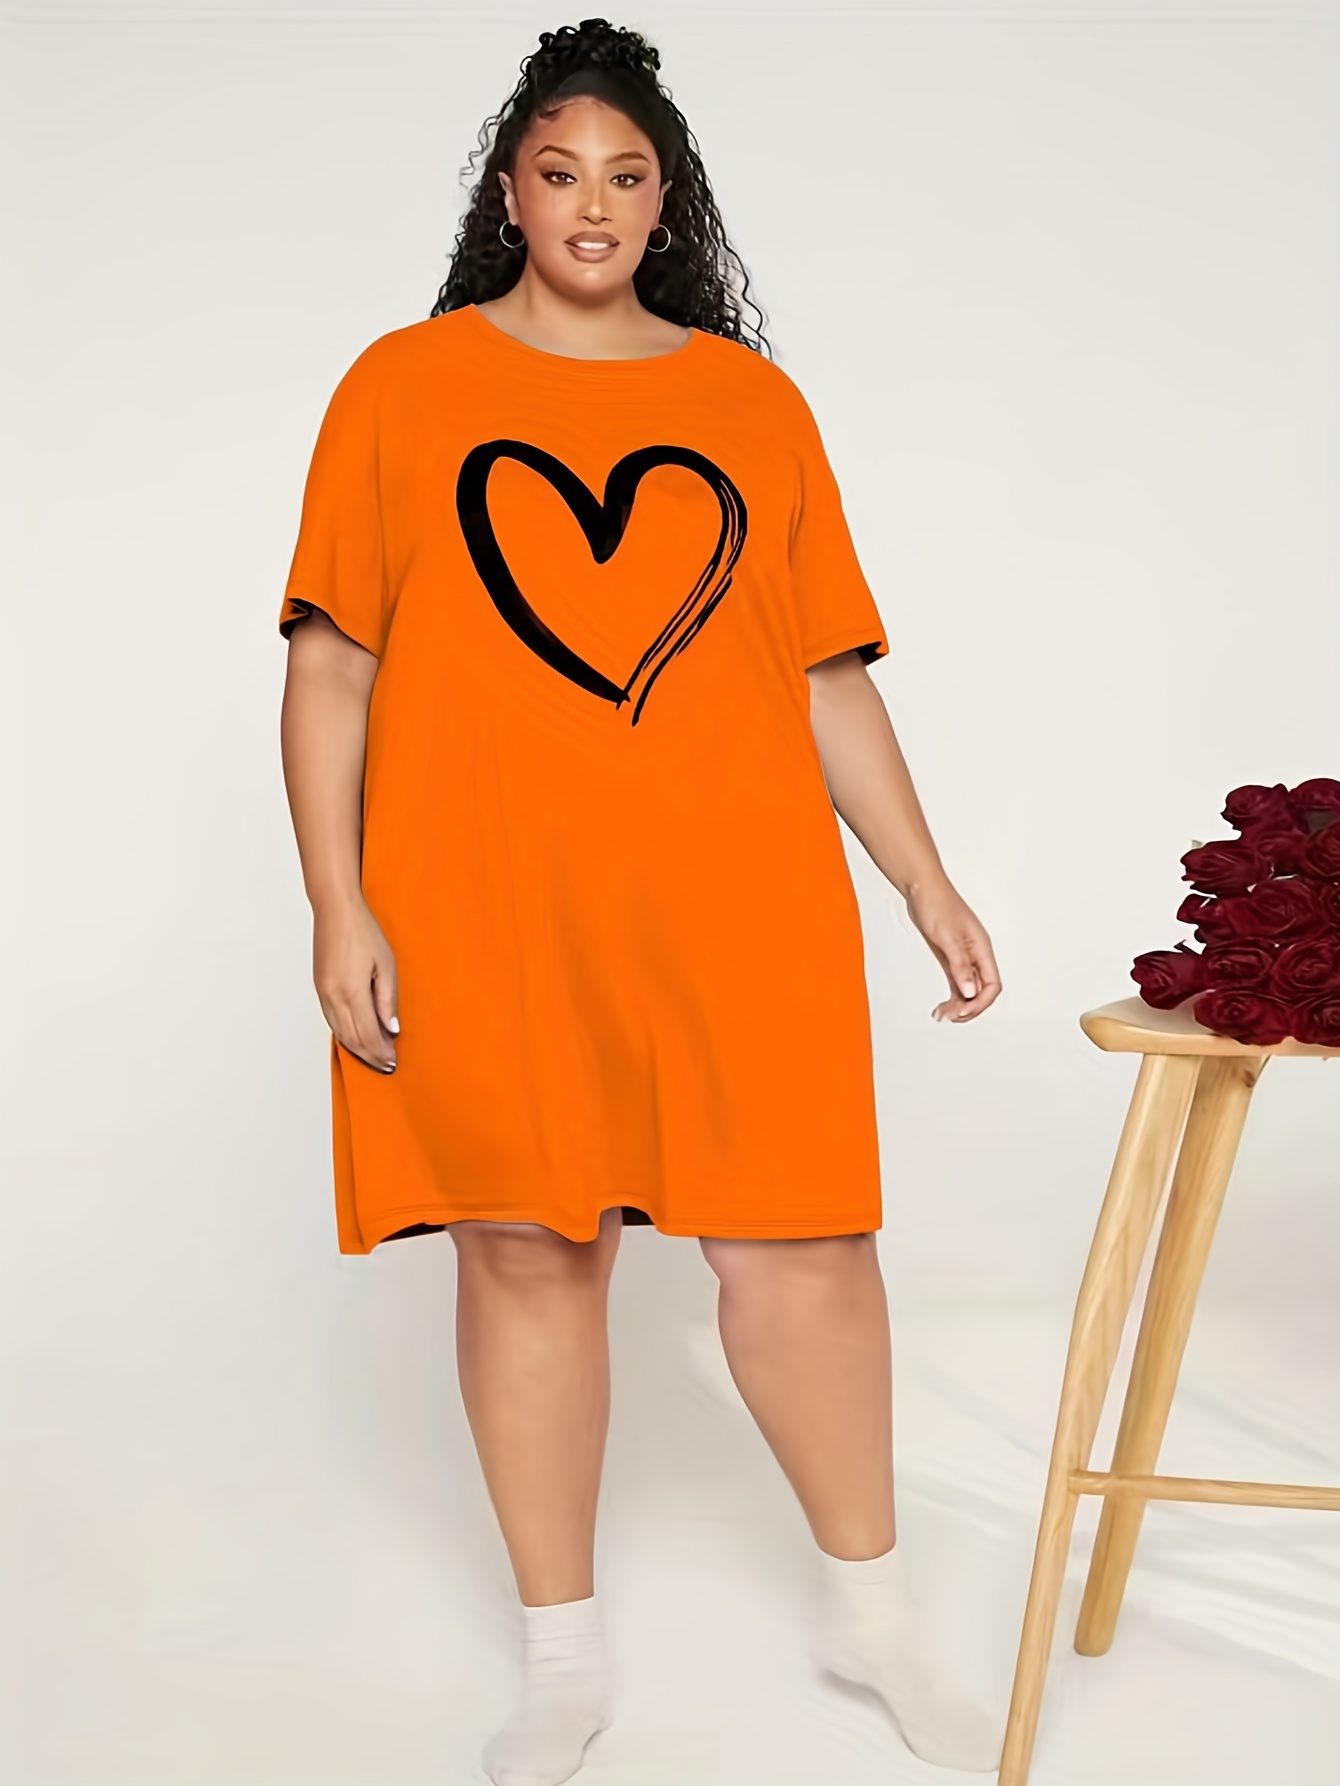 Plus-Size Loungewear Outfit for At Home Style